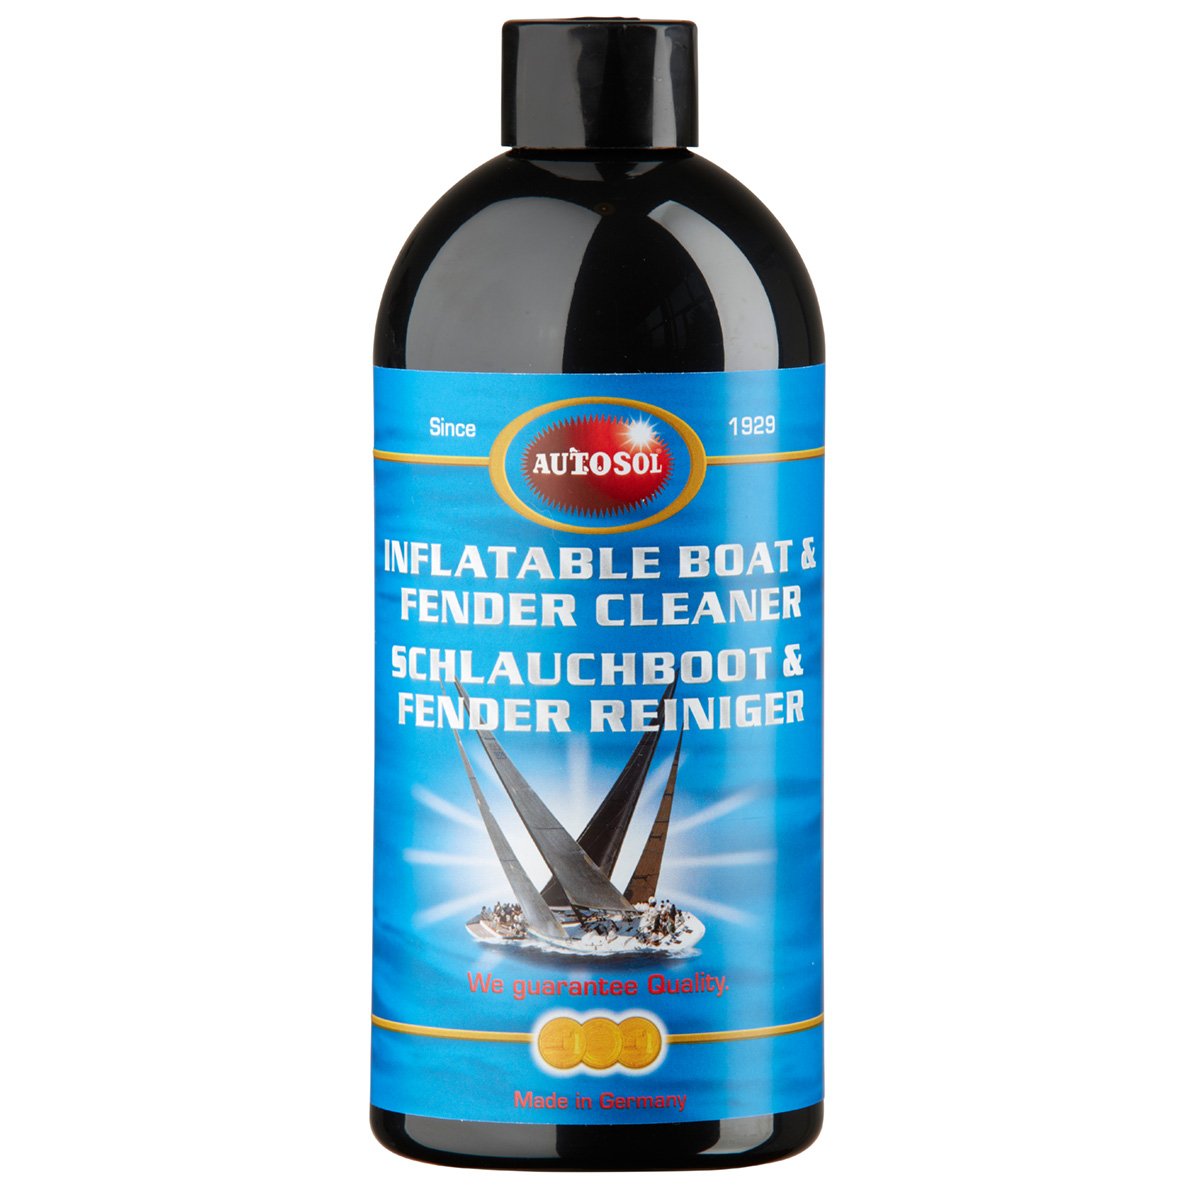 Autosol Marine Inflatable Boat & Fender Cleaner 500 mls-Cleaners & Polishers-Tool Factory